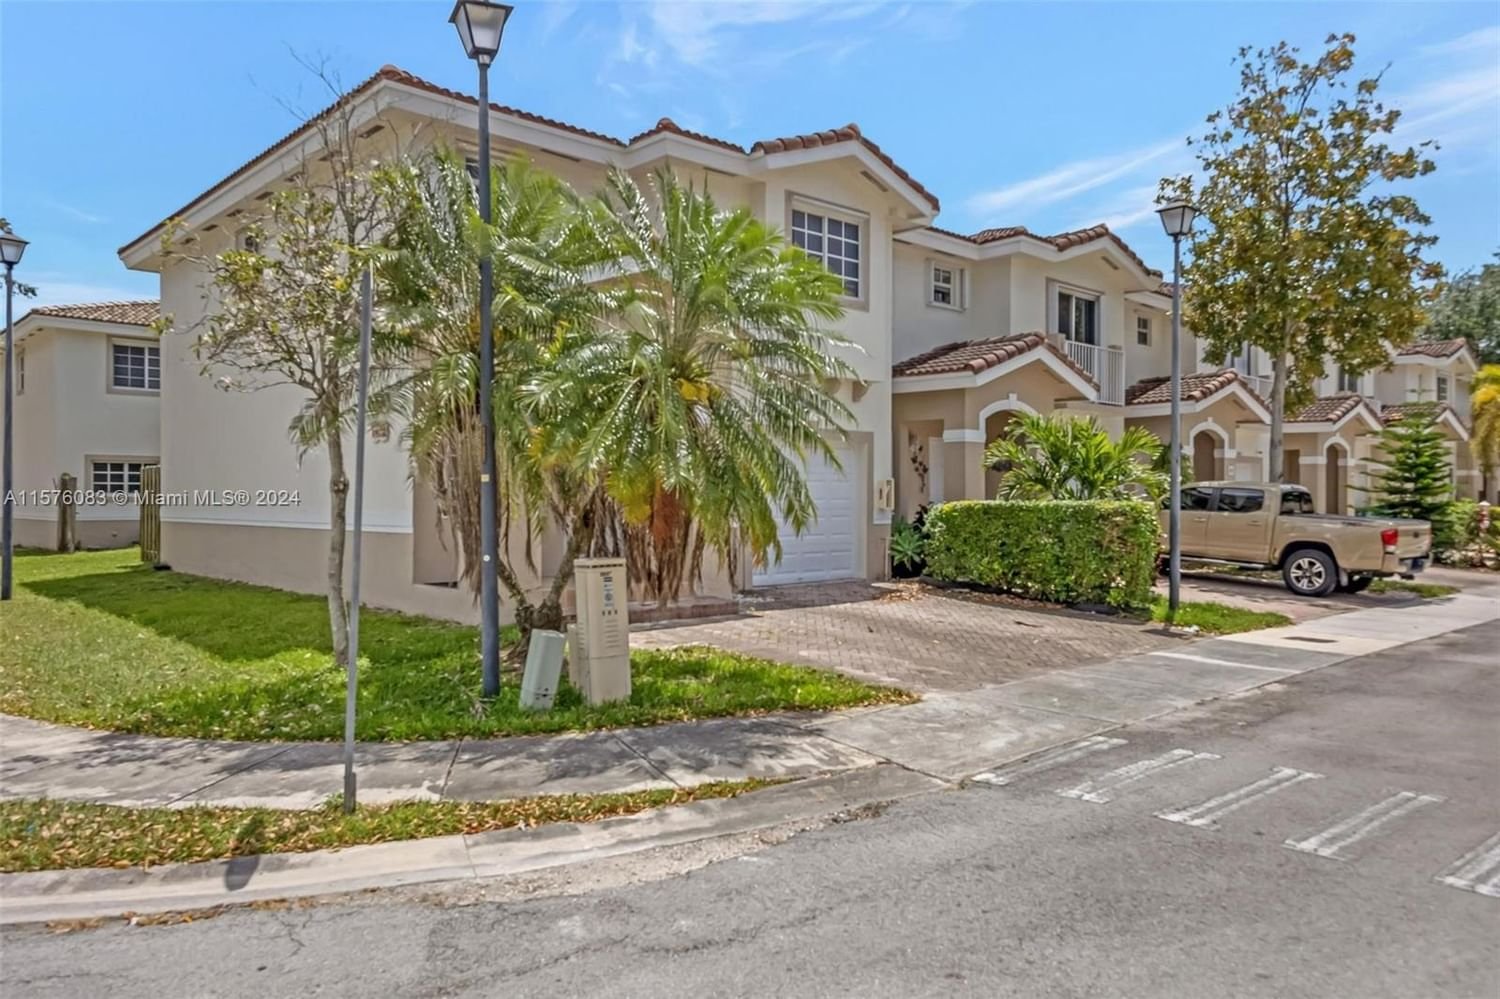 Real estate property located at 14138 260th St, Miami-Dade County, CEDARS WOODS HOMES CONDO, Naranja, FL